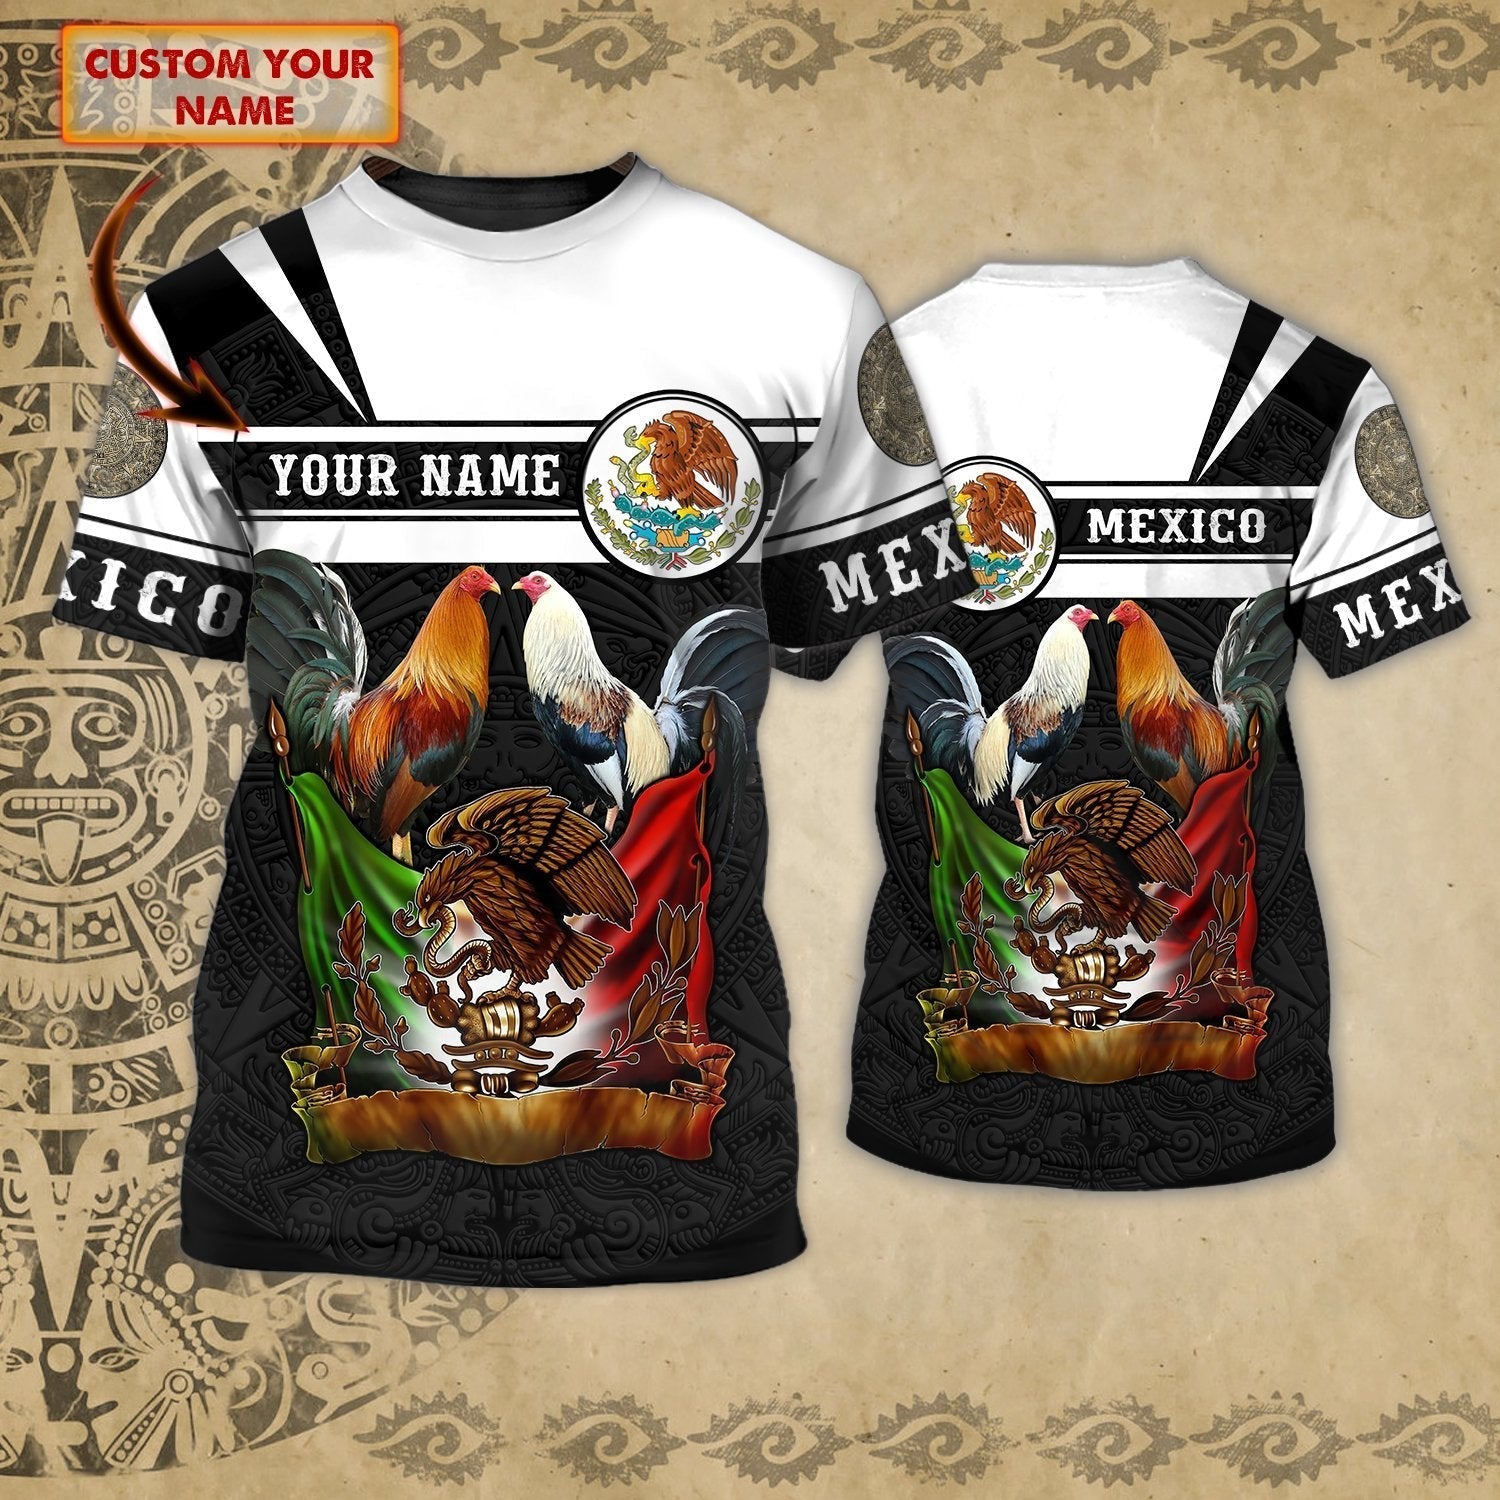 Customized 3D full printed Mexico Shirt/ Rooster and Eagle Mexican Shirt/ Mexico Shirts